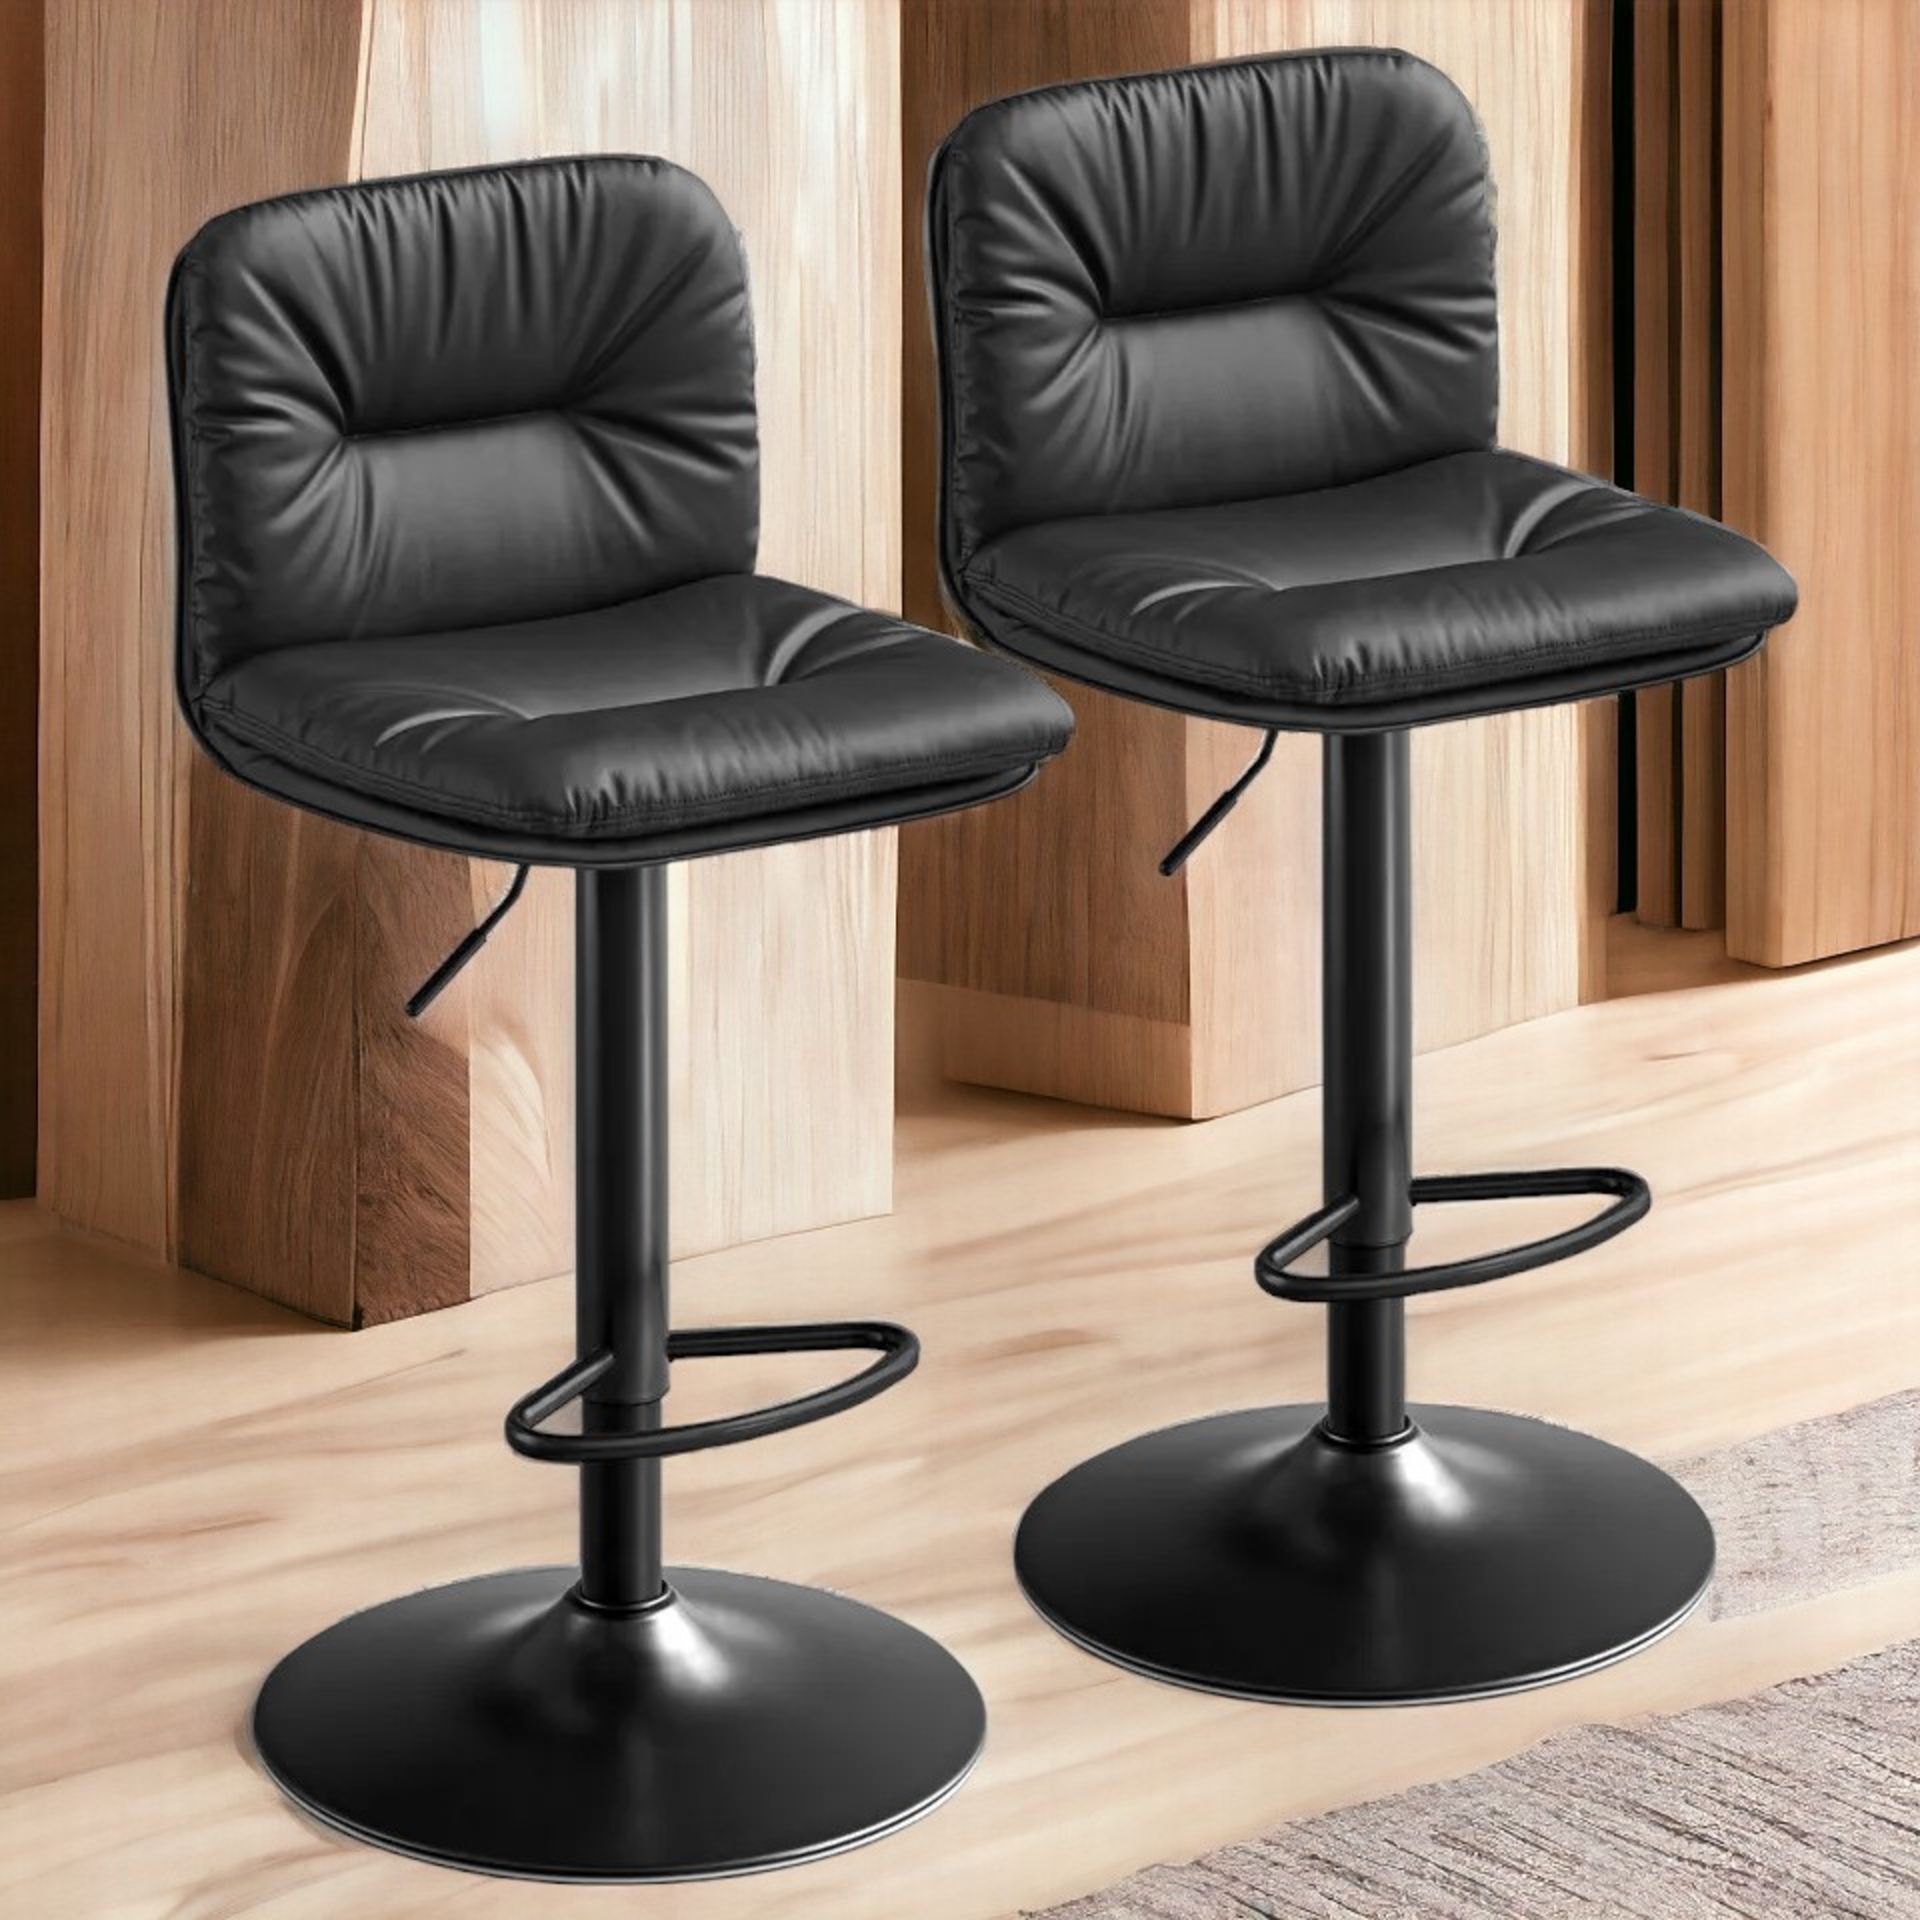 FREE DELIVERY- BRAND NEW BAR STOOLS SET OF 2 BREAKFAST STOOL CHAIRS KITCHEN CHAIRS